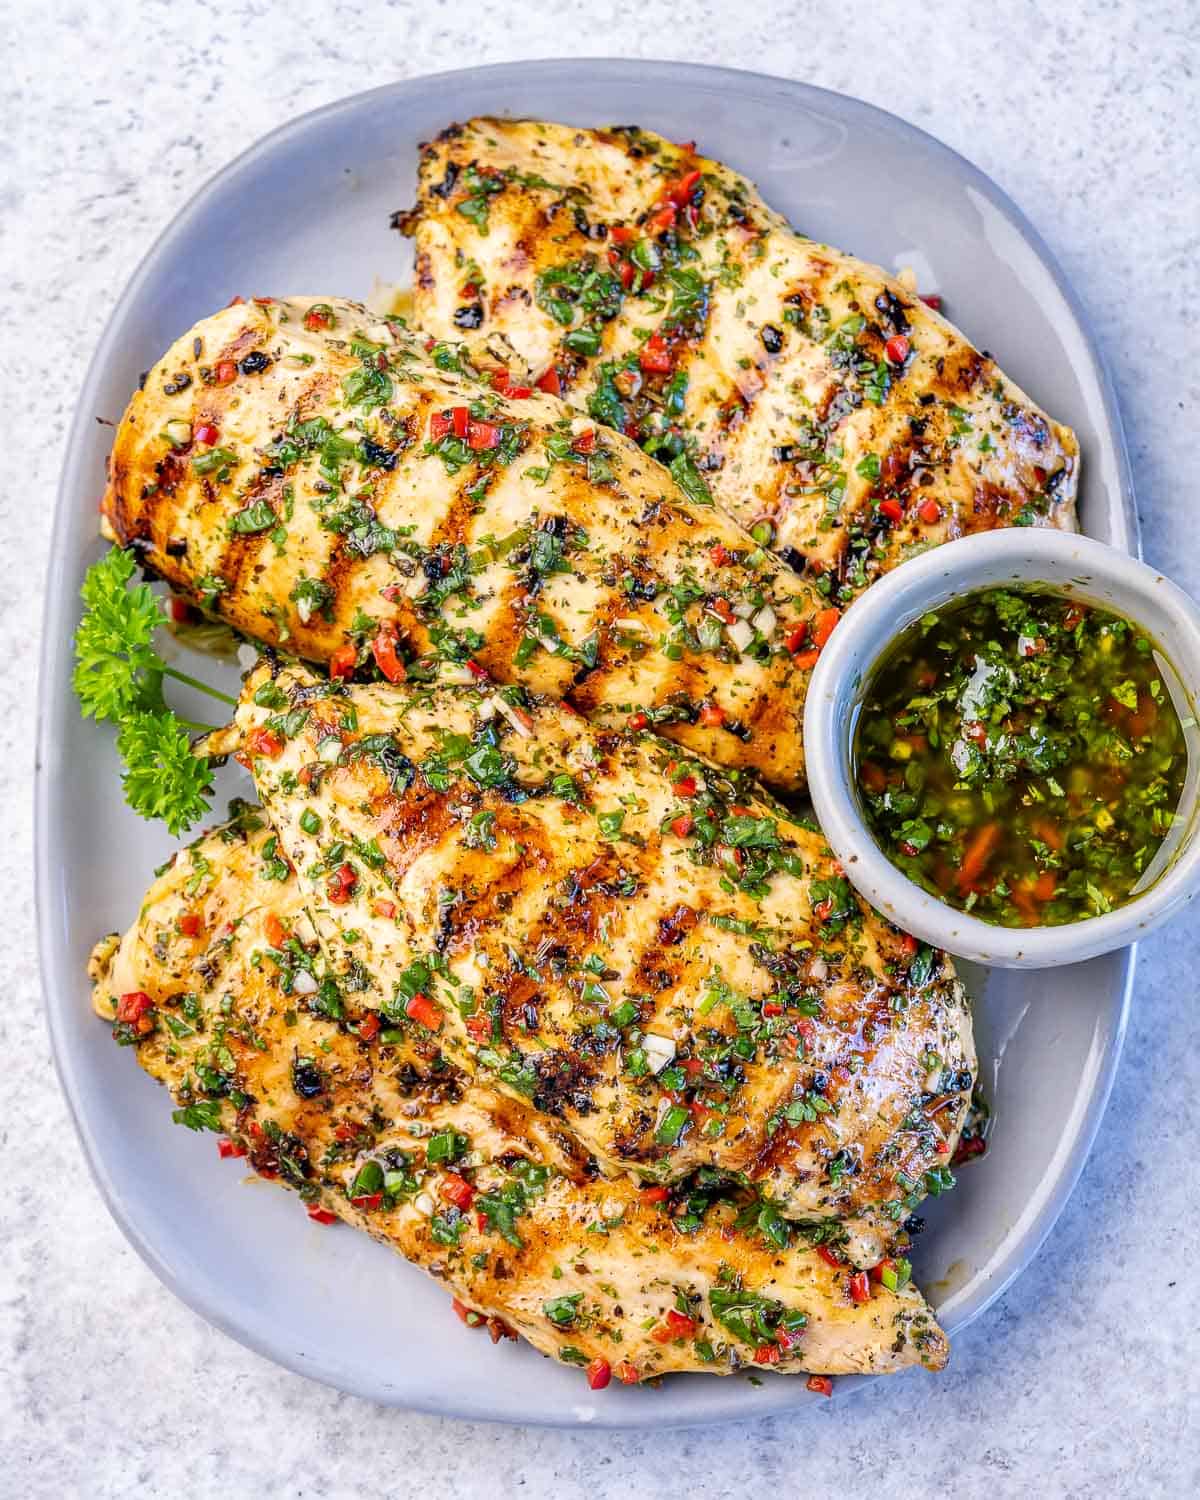 Grilled Chimichurri Chicken Breast - Healthy Fitness Meals